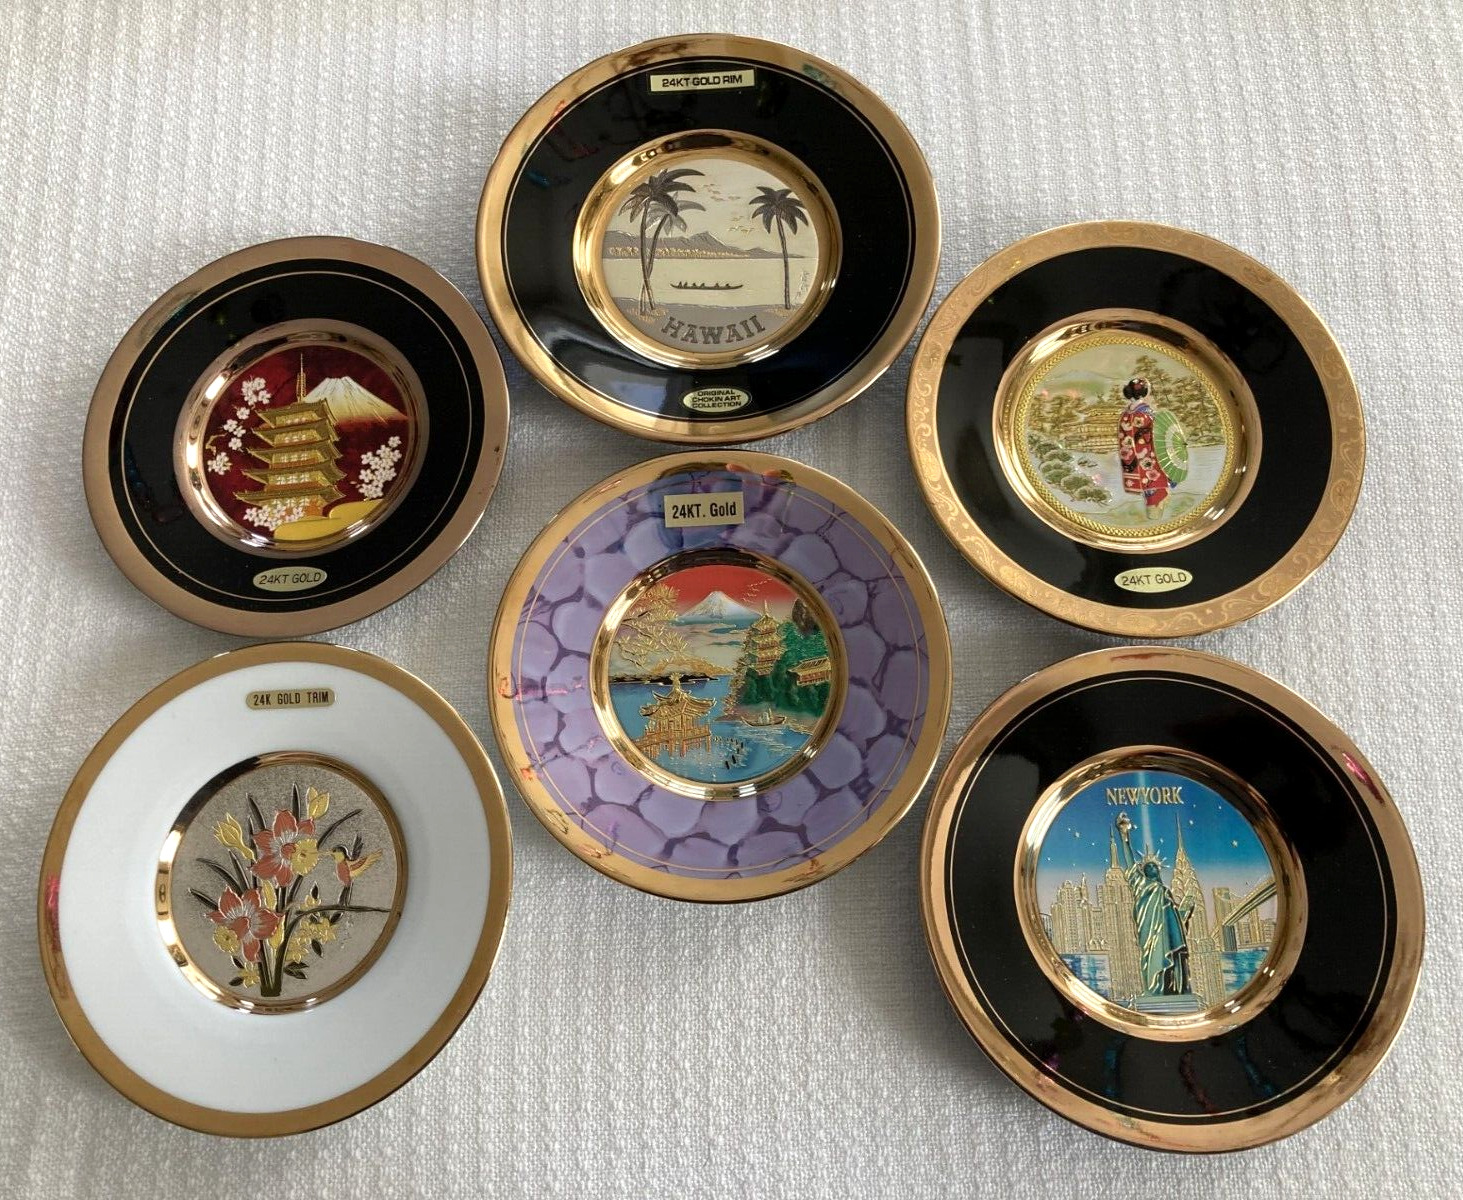 Collection of 6 Art of Chokin Plates, Dynasty Gallery, 24KT Gold edge, Mt Fuji